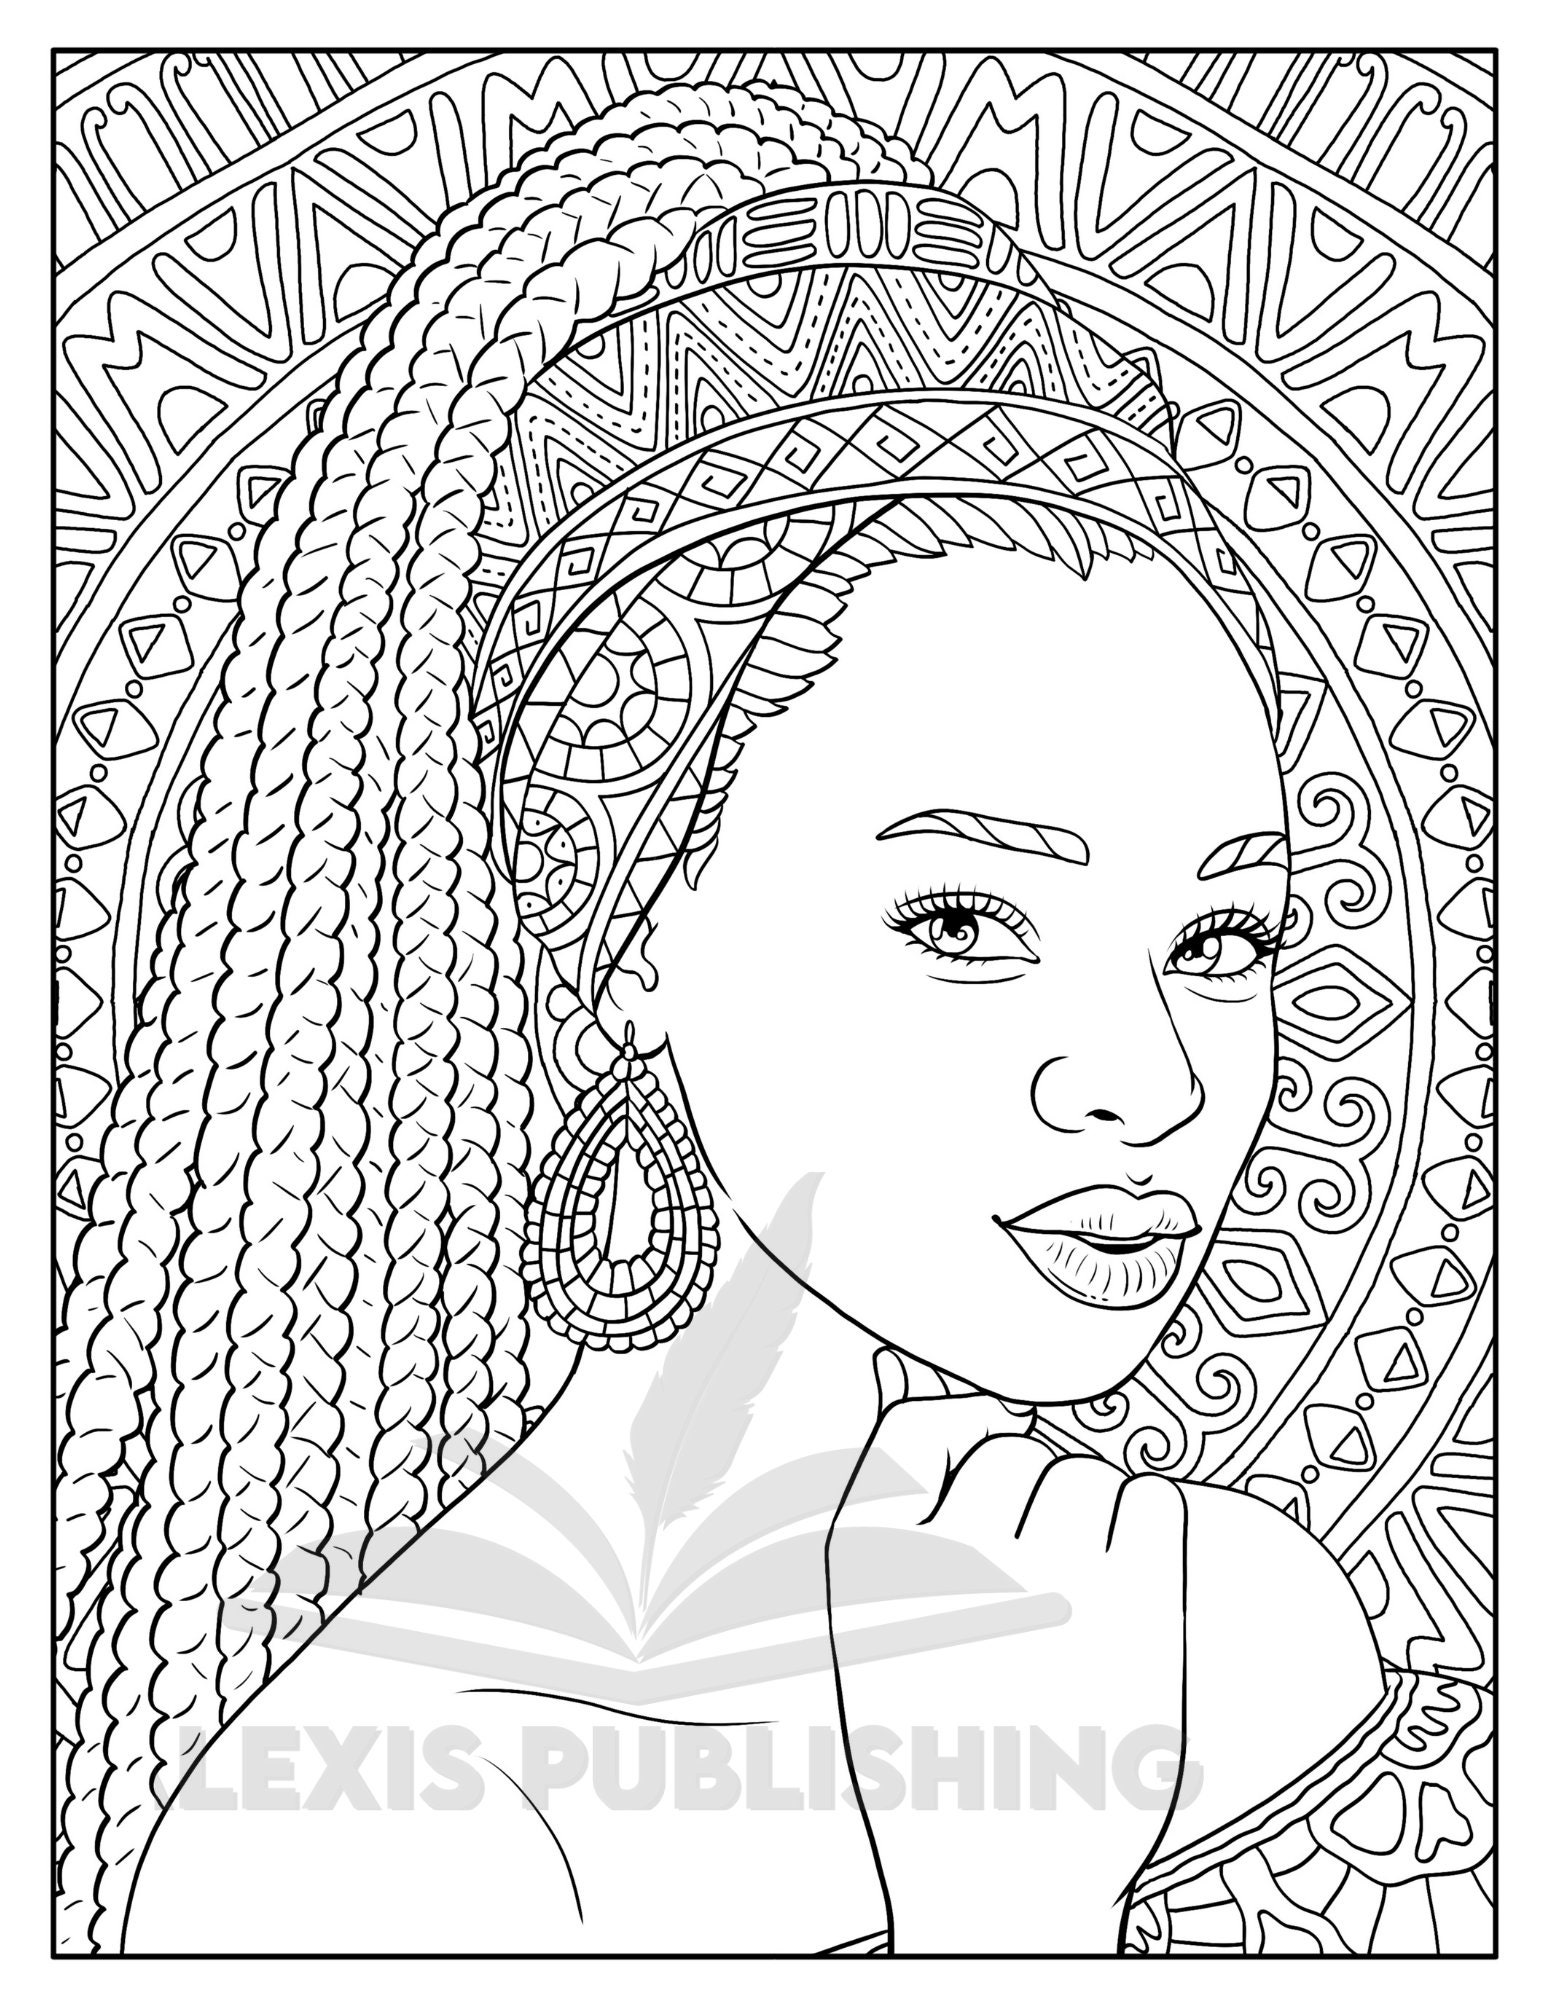 Black African Queens Coloring Book for Adults: Black Girl Coloring Book  With Beautiful African American Women Portraits, Celebrating Black and  Brown